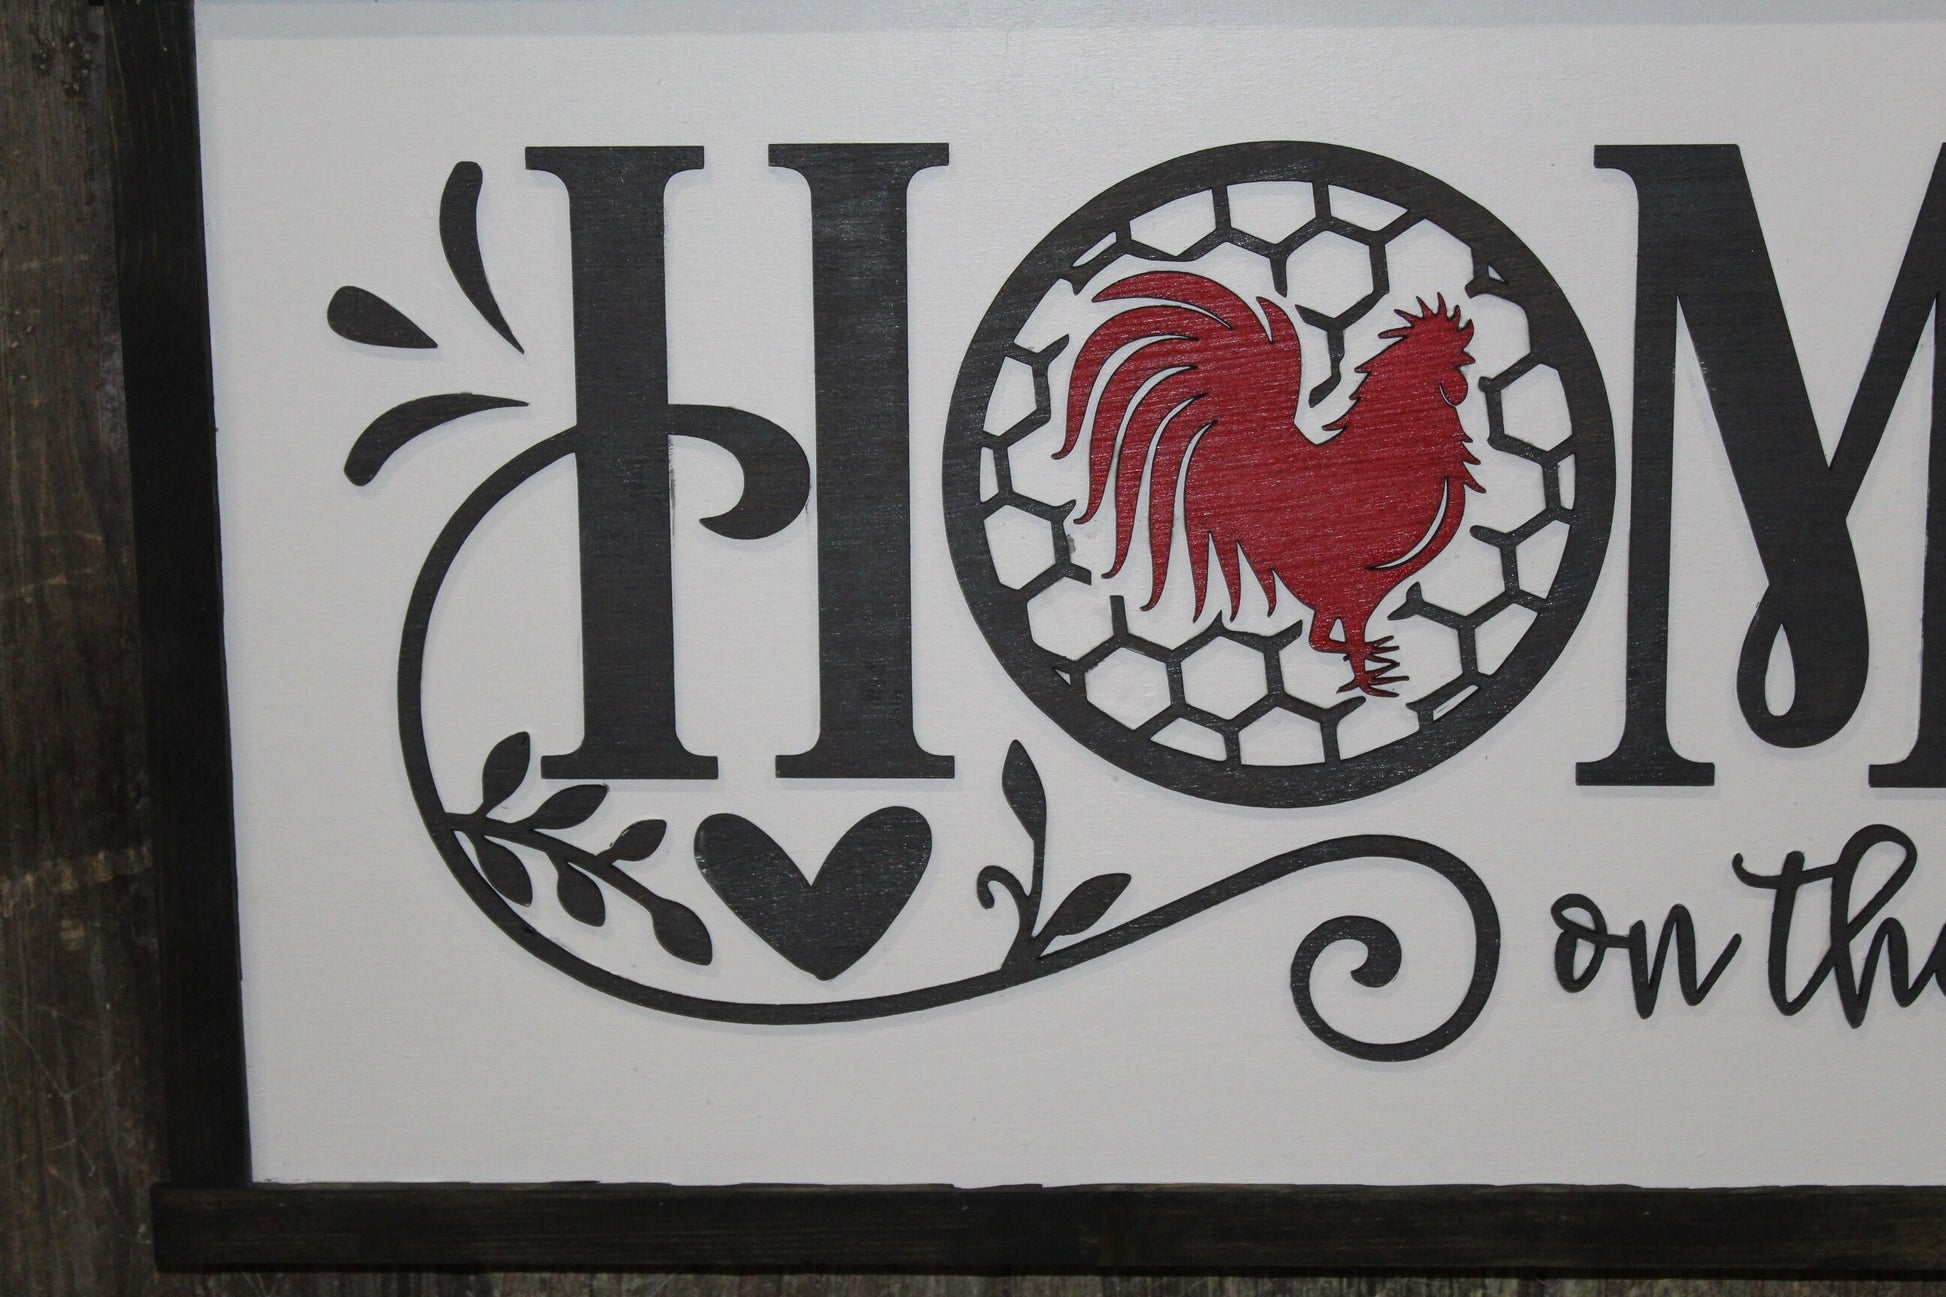 Kitchen Sign Chicken Home Farmhouse On The Farm Wood Rooster Chicken Wire Text 3D Raised Text County Wall Decoration Primitive Rustic Red